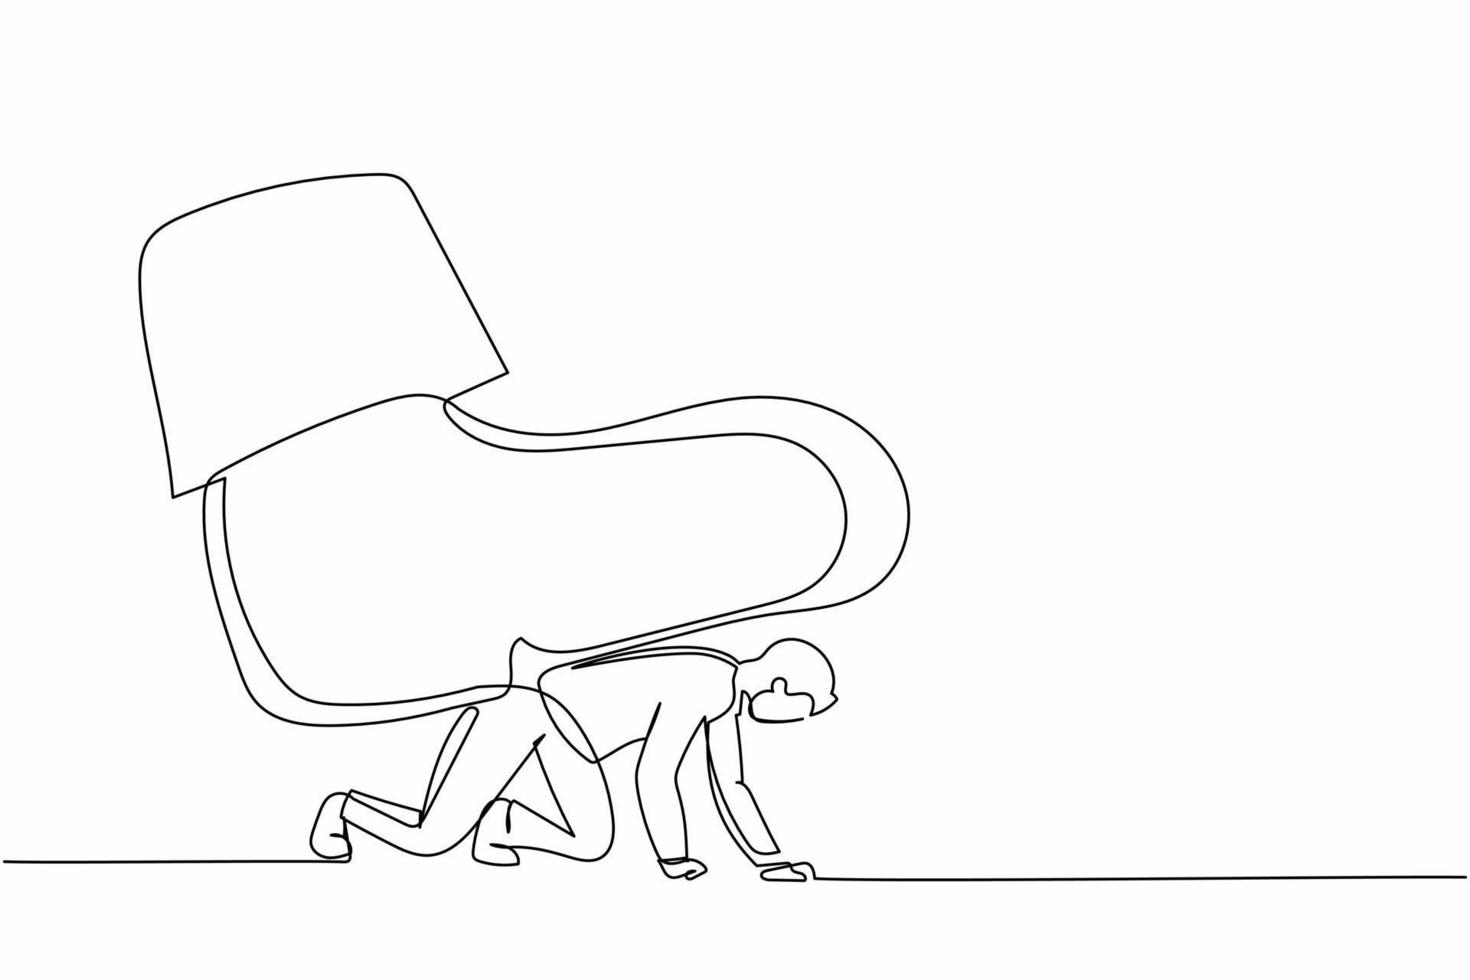 Continuous one line drawing businessman crawling under giant foot trample. Manager under tyranny, dictatorship concept. Minimal metaphor concept. Single line draw design vector graphic illustration